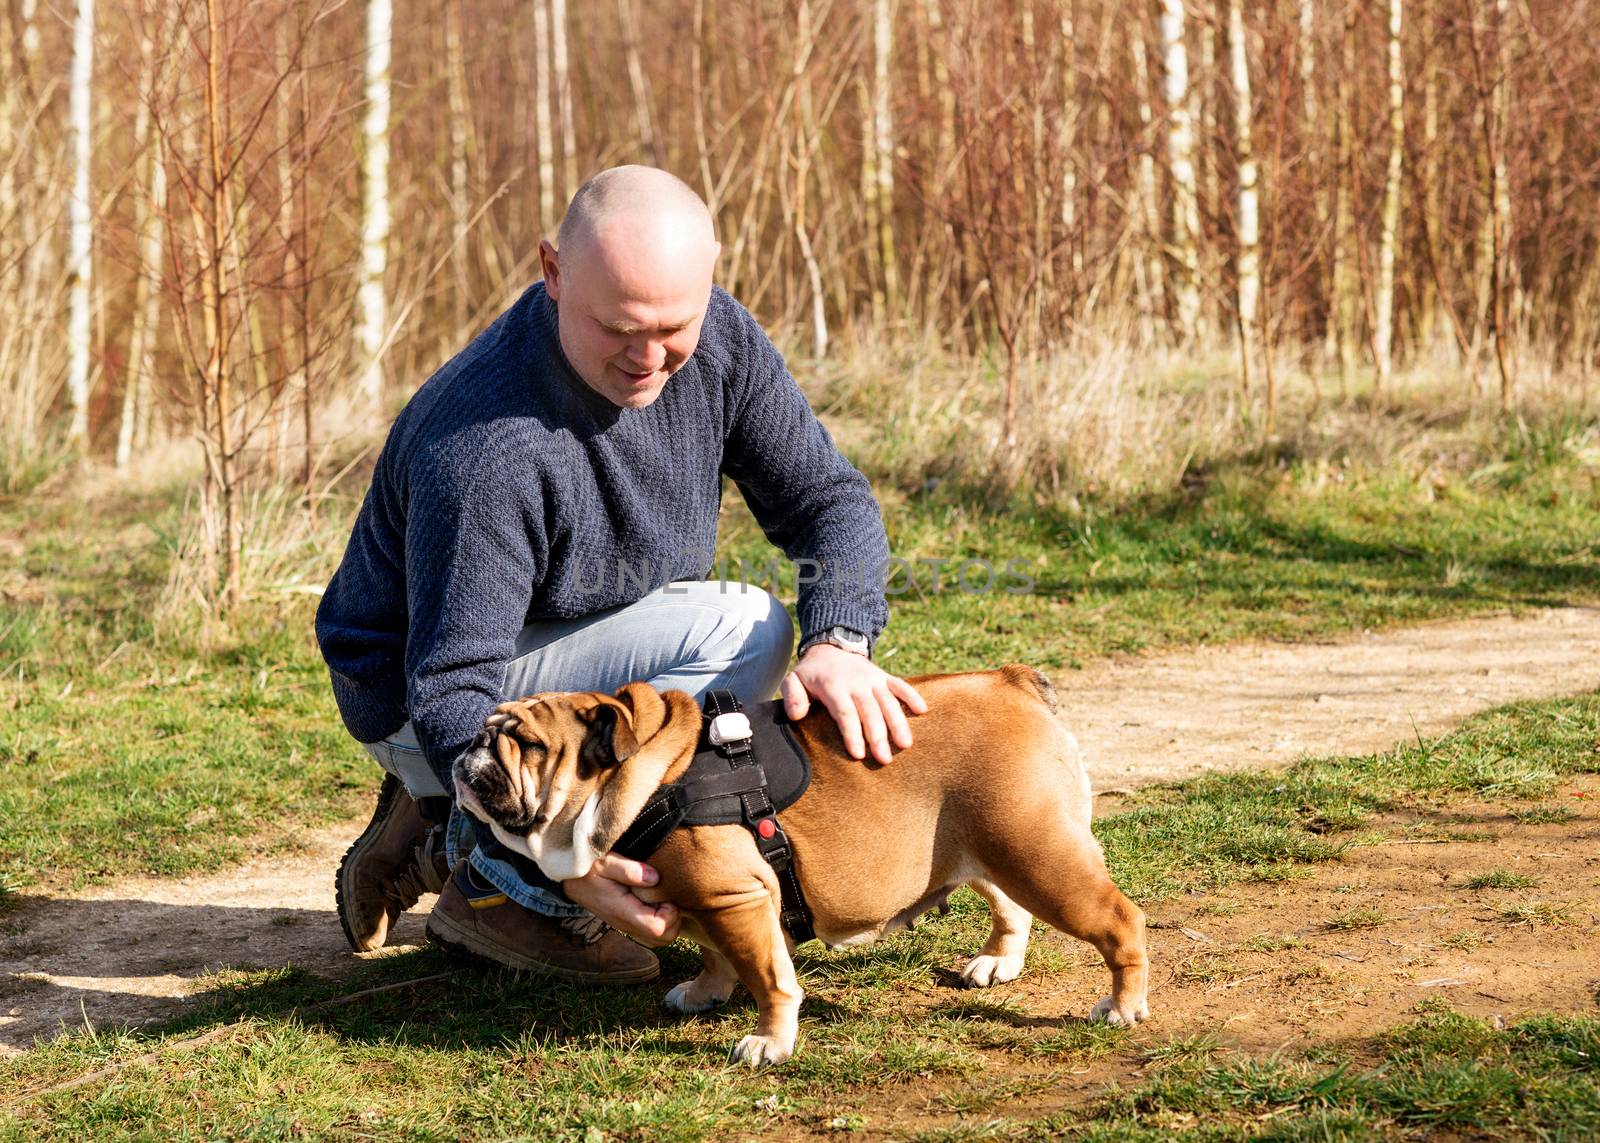 Man and English bulldog / dog go for a walk in the park in Autumn